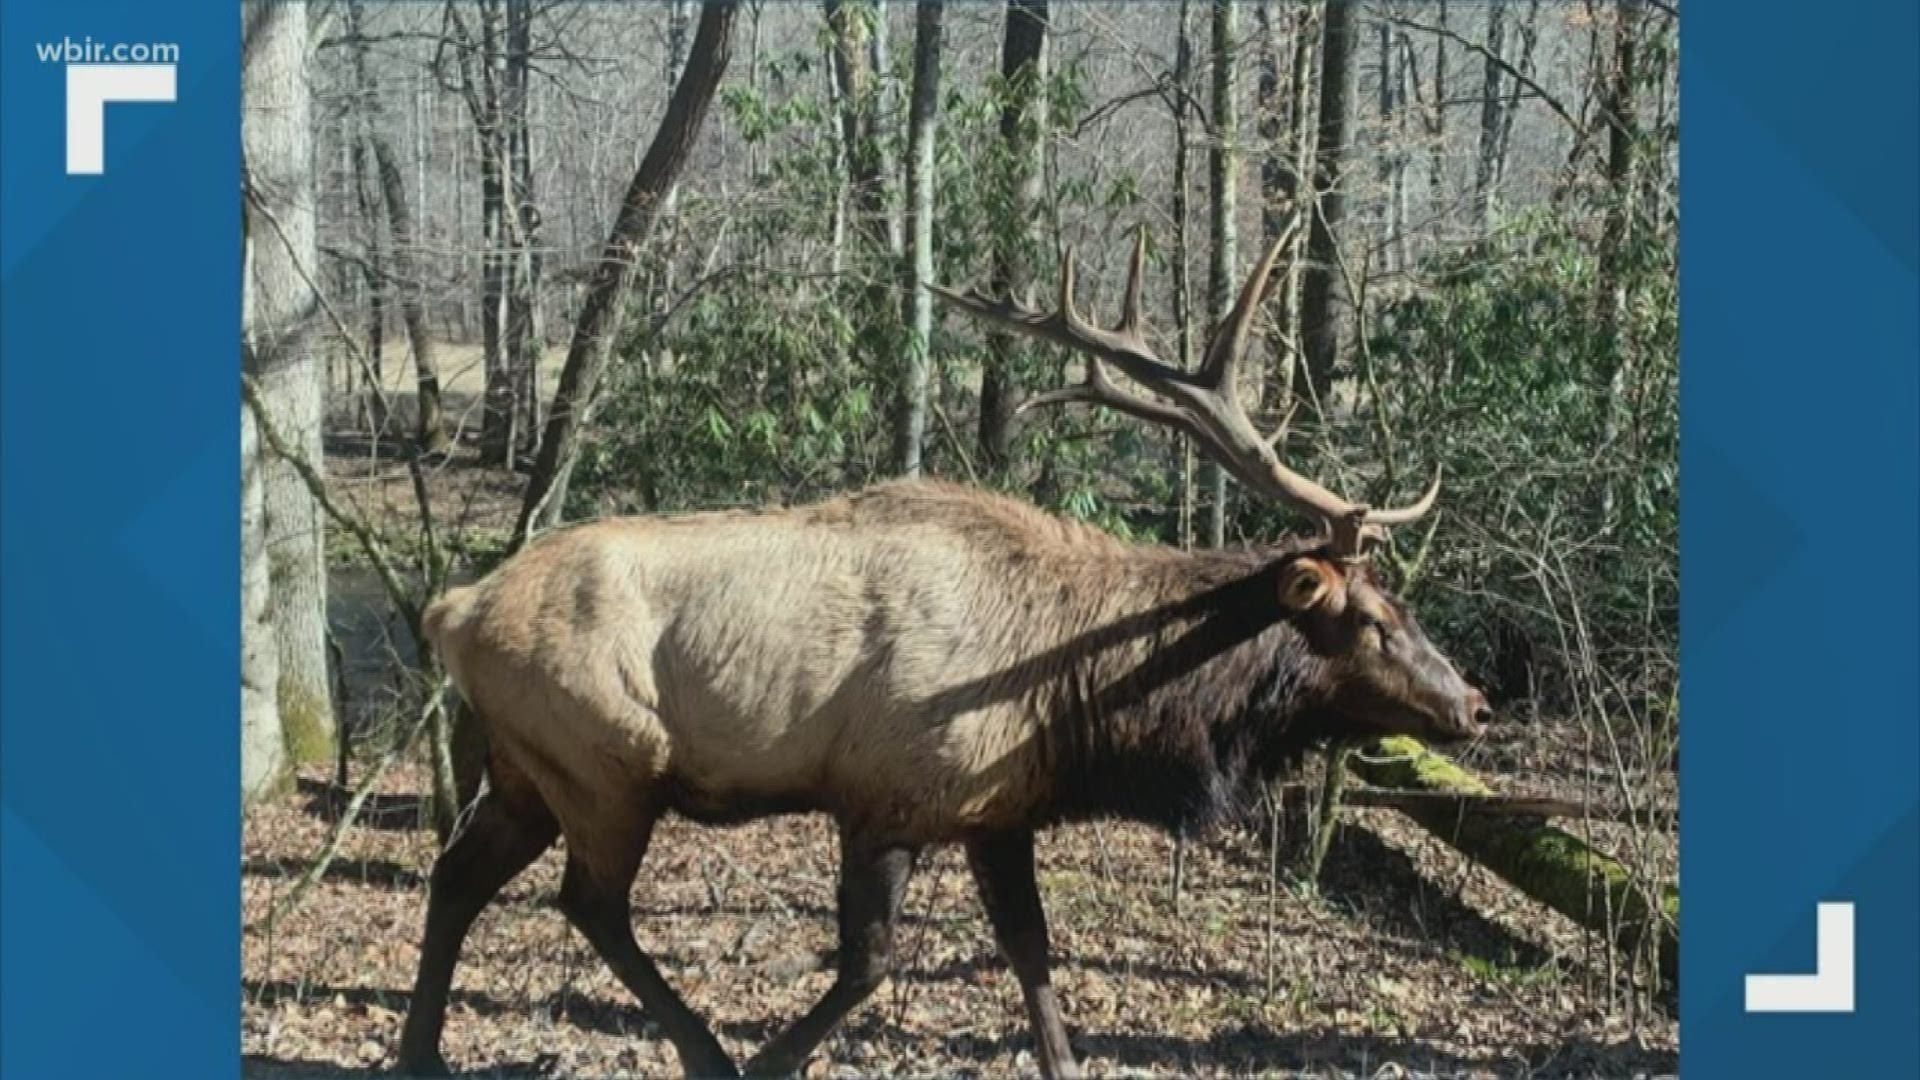 A viewer sent us pictures of an elk herd that crossed the road in the Smokies, causing a traffic jam as they approached cars.